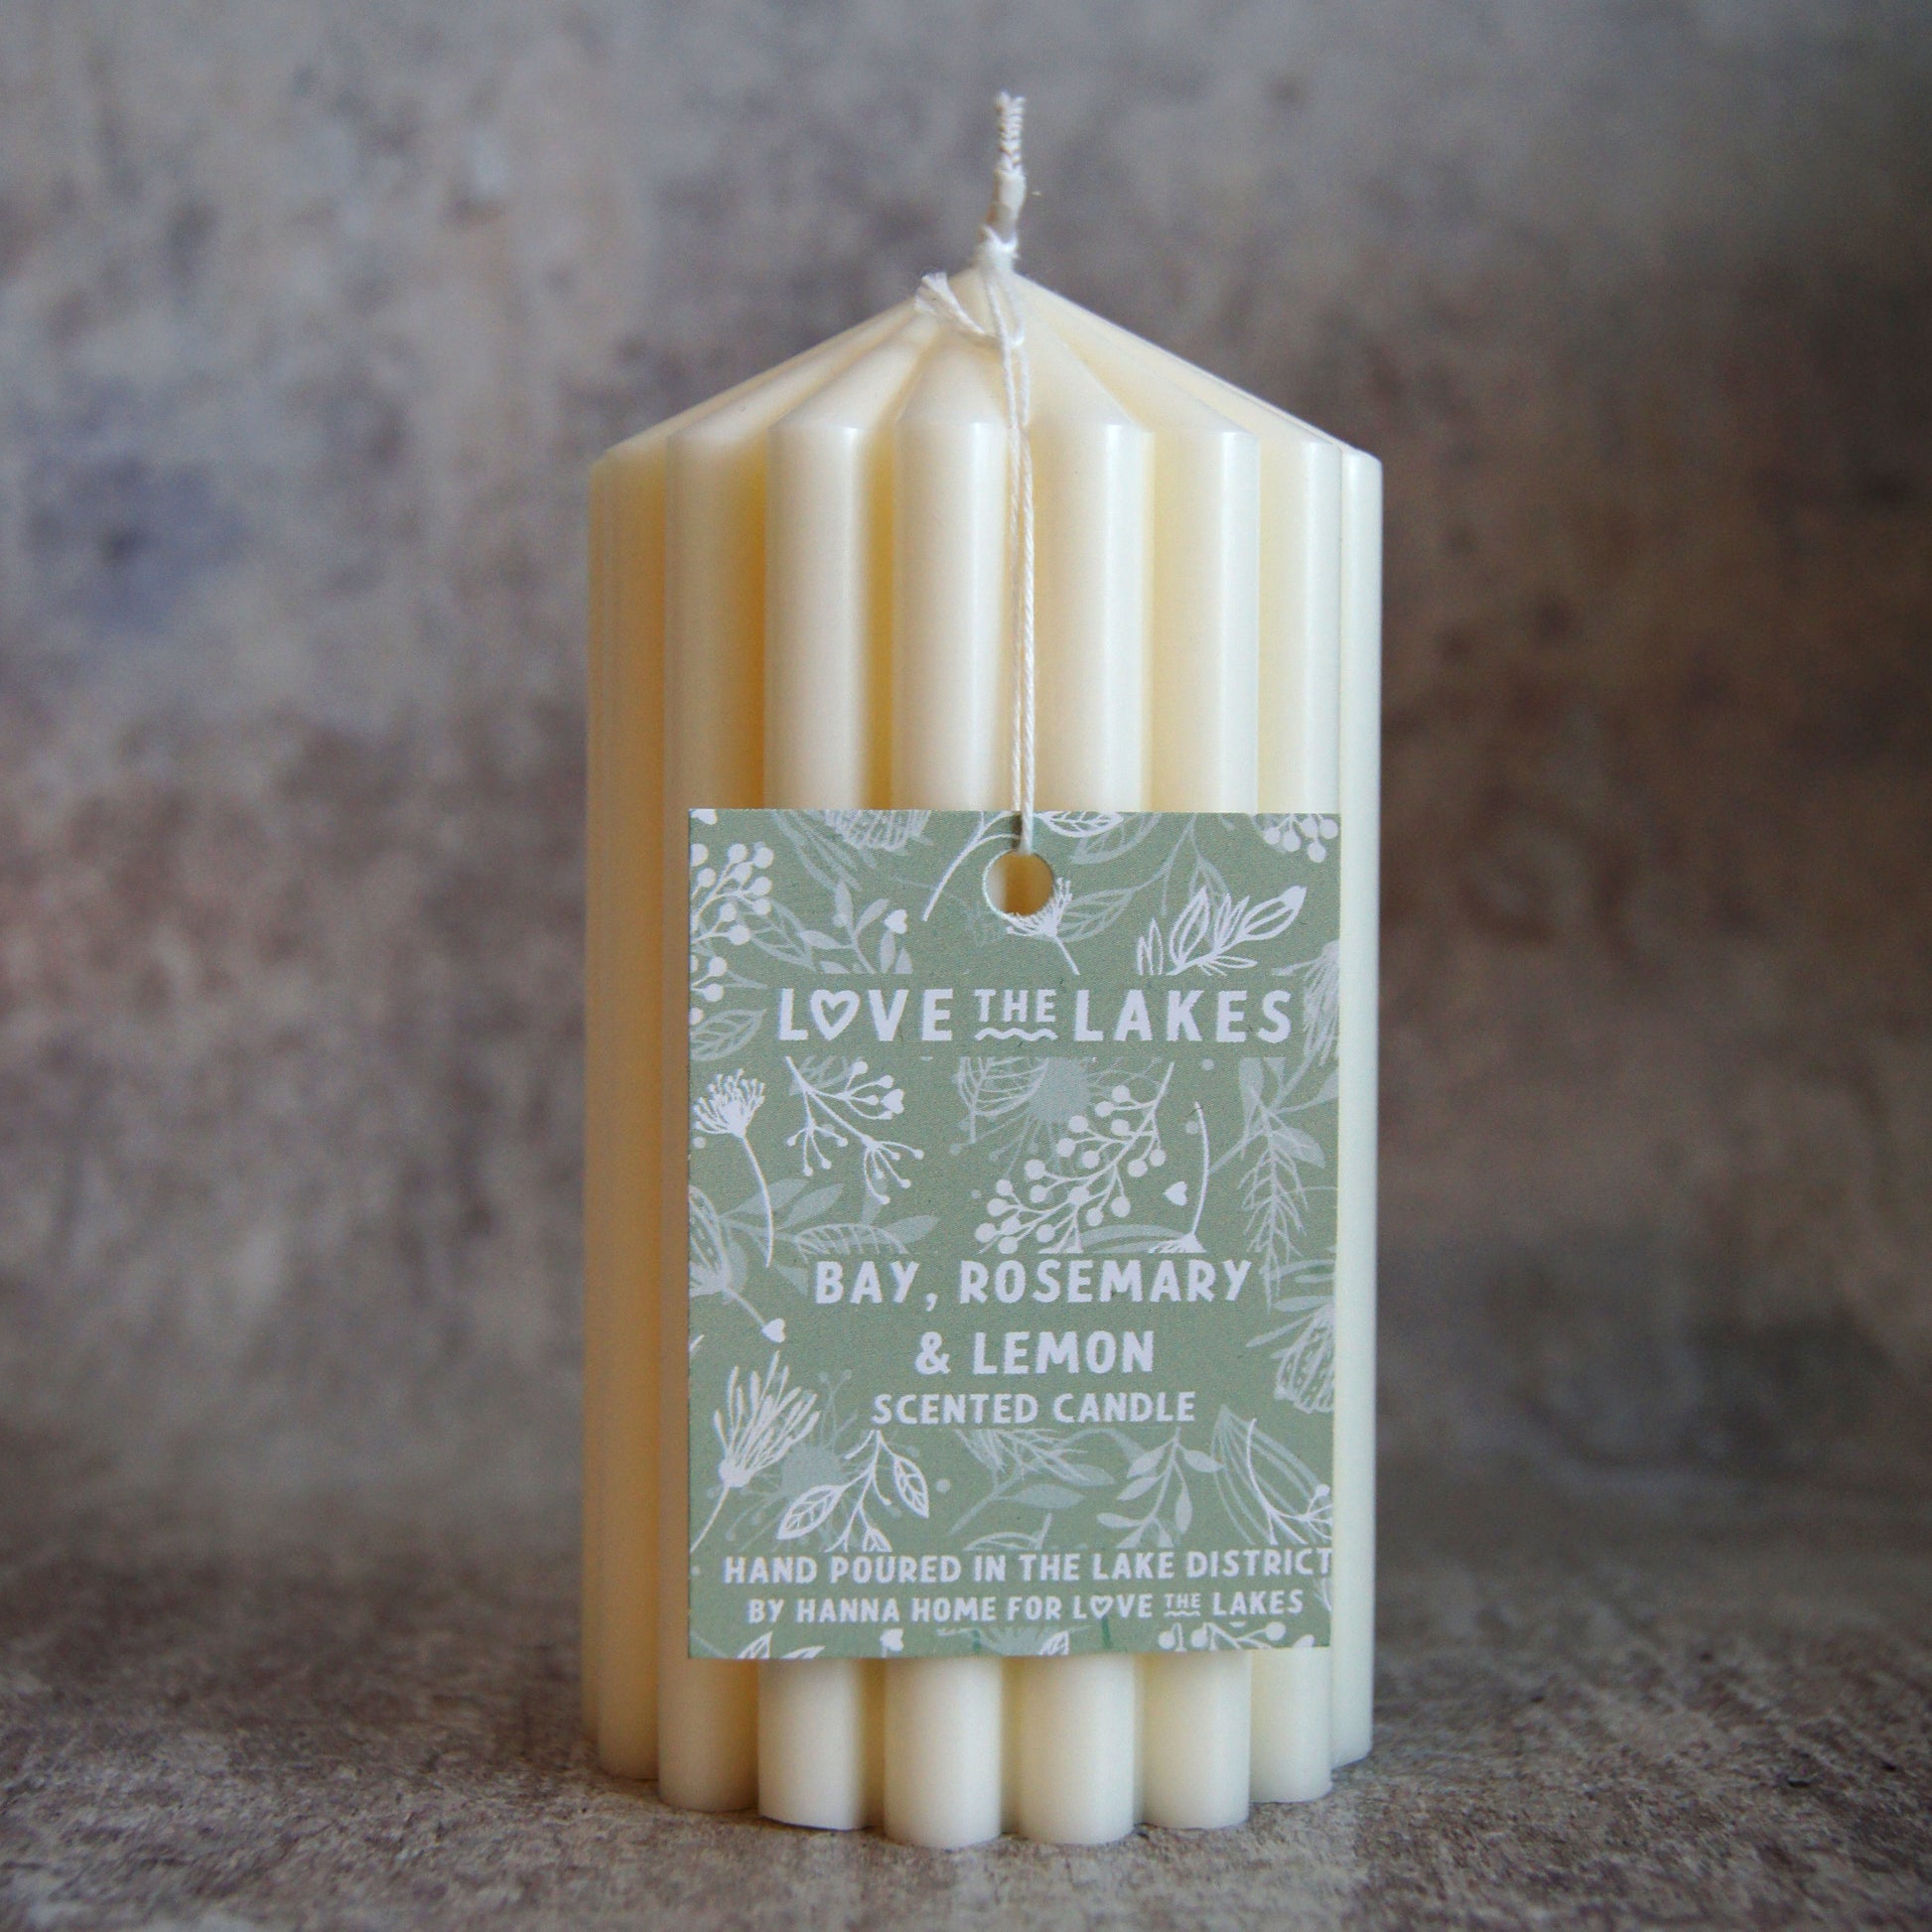 14cm tall circus top shaped pillar candle in Bay, Rosemary & Lemon fragrance